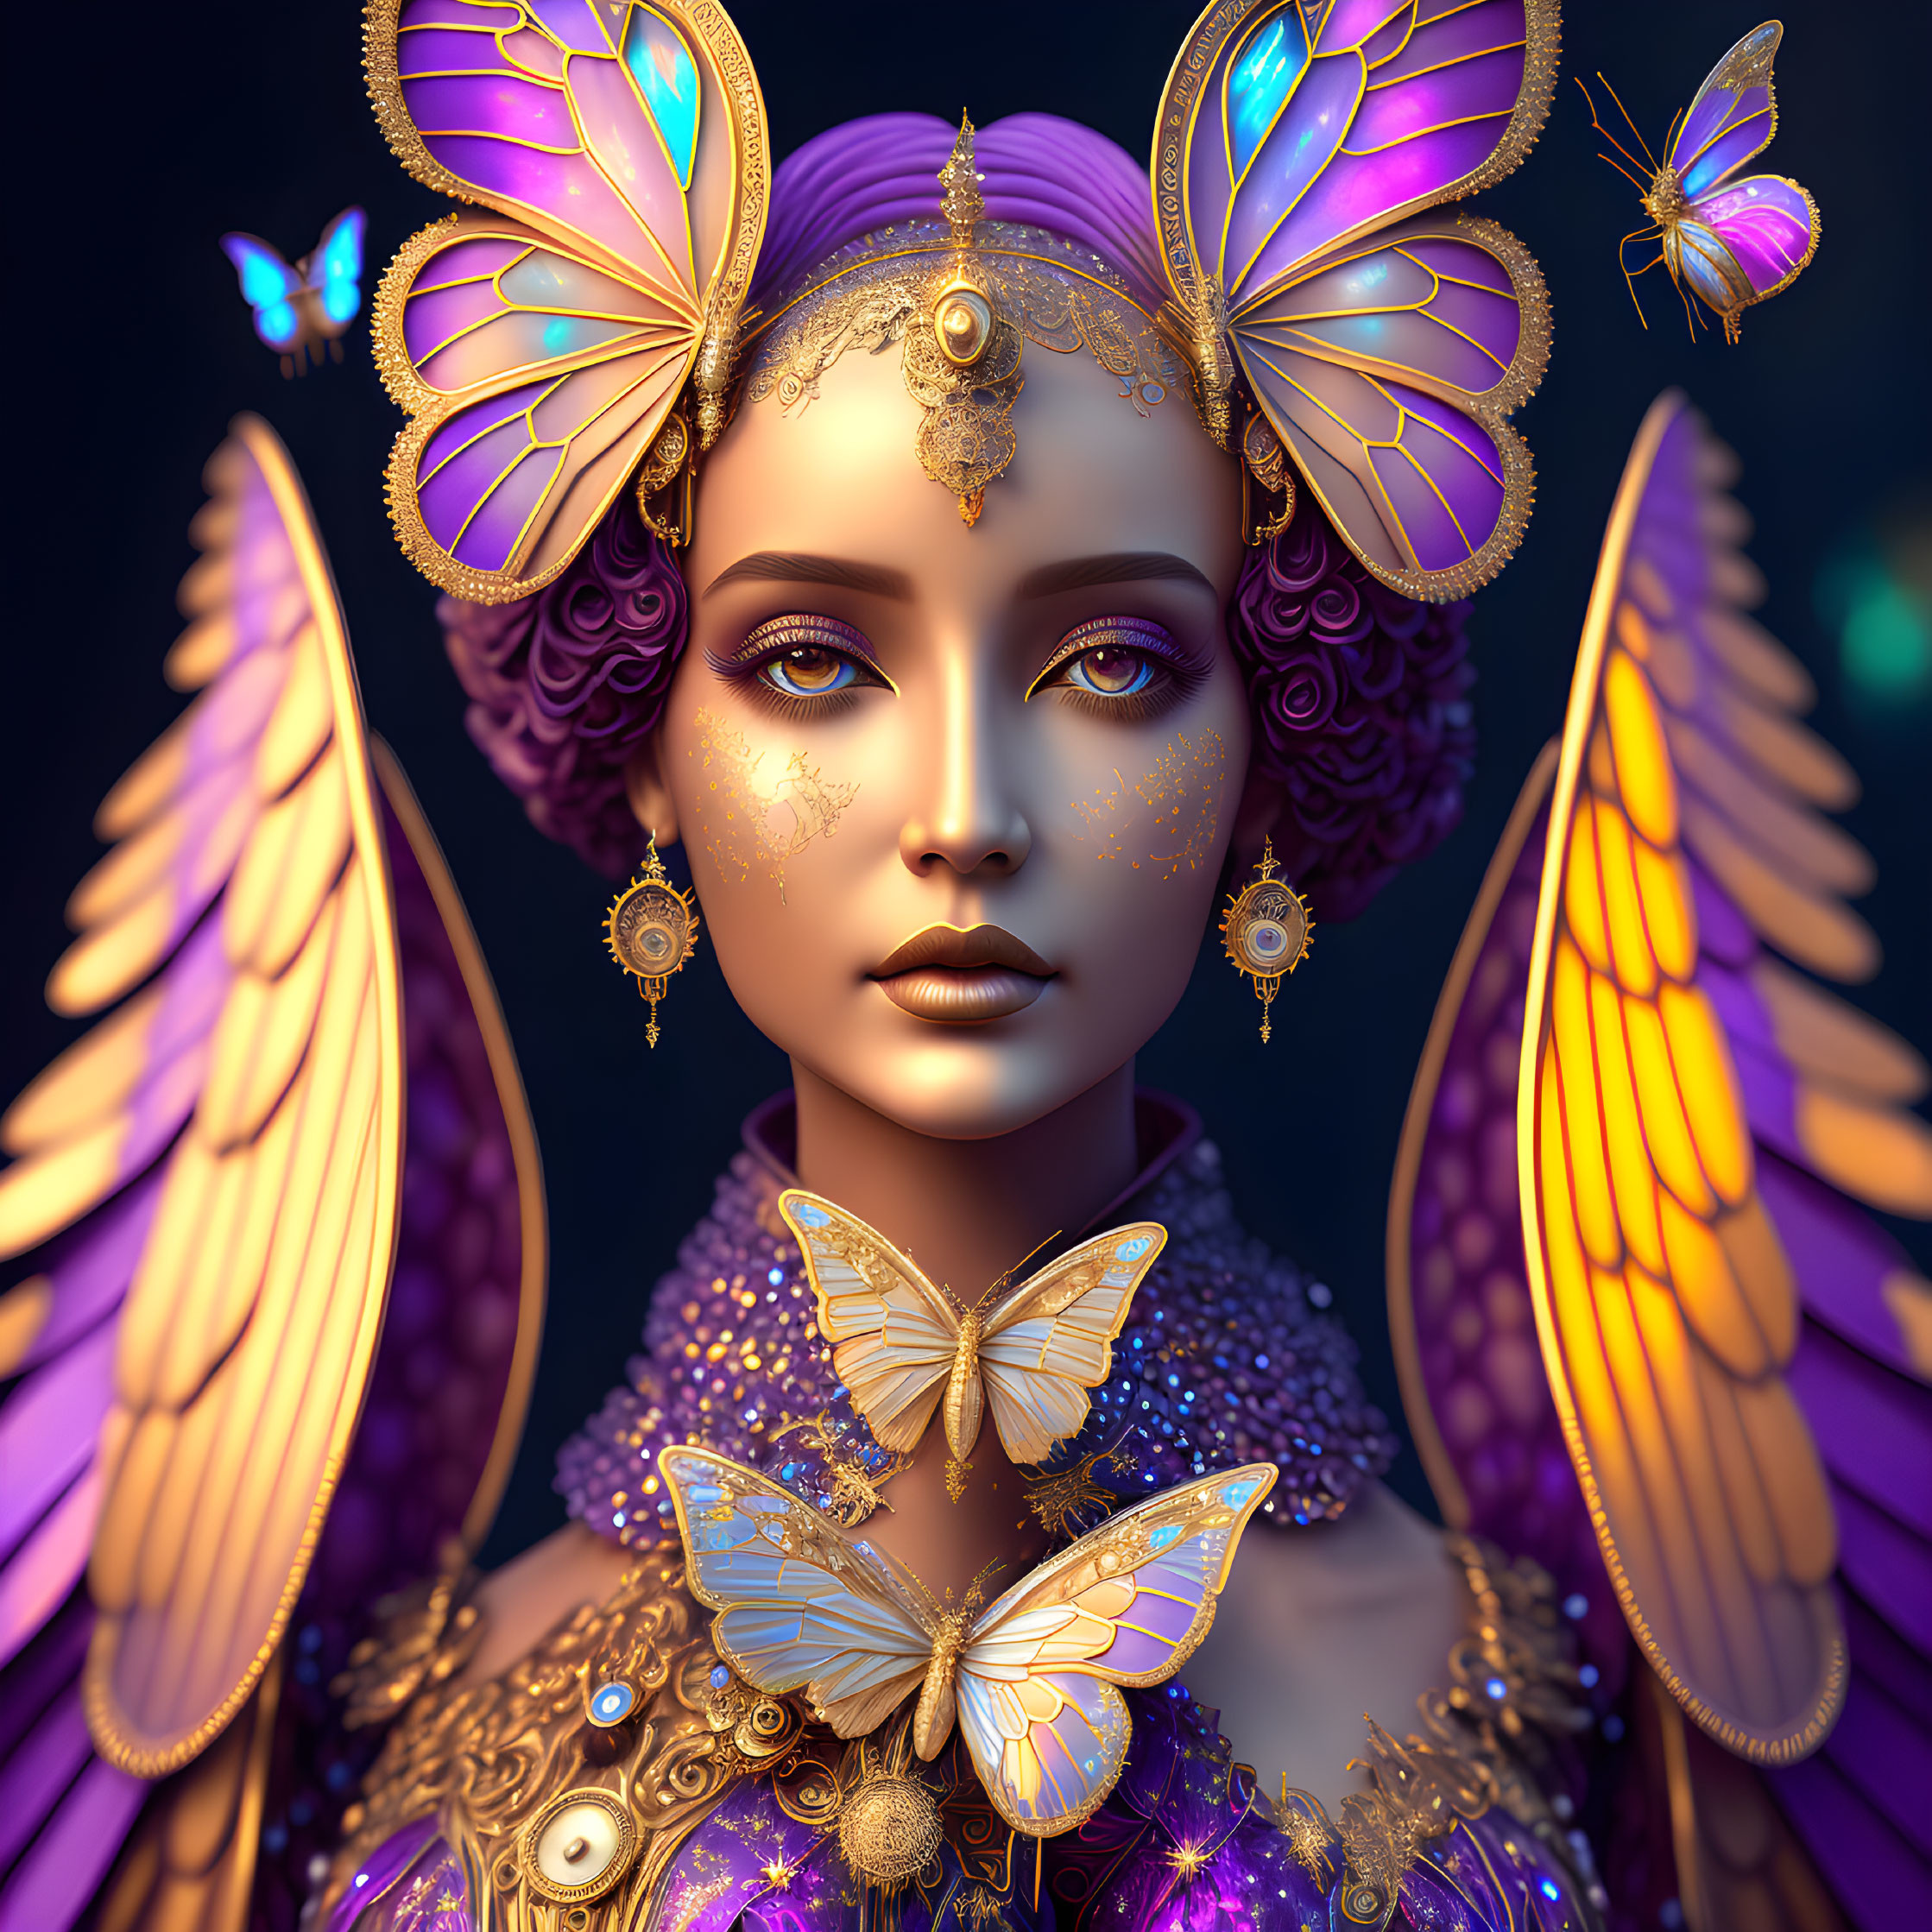 Digital artwork: Person with butterfly adornments in vibrant purples and golds surrounded by butterflies on